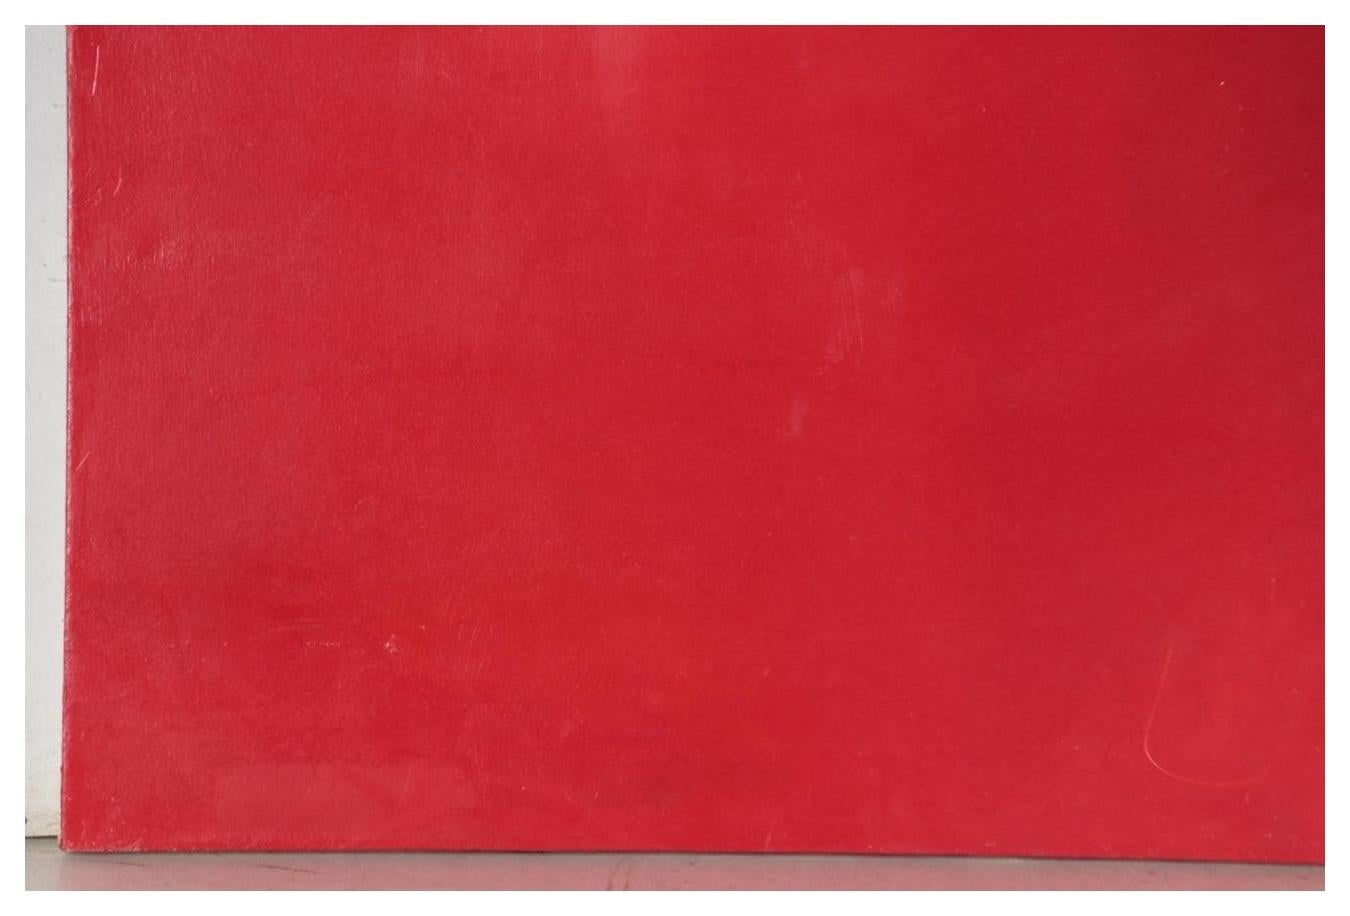 Elena Osterwalder (Mexico/United States, 20th/21st century)
Rojo/Red #6, 2003
Oil painting on canvas
Signed and dated to the side

Introducing the Color-Field Oil Painting 